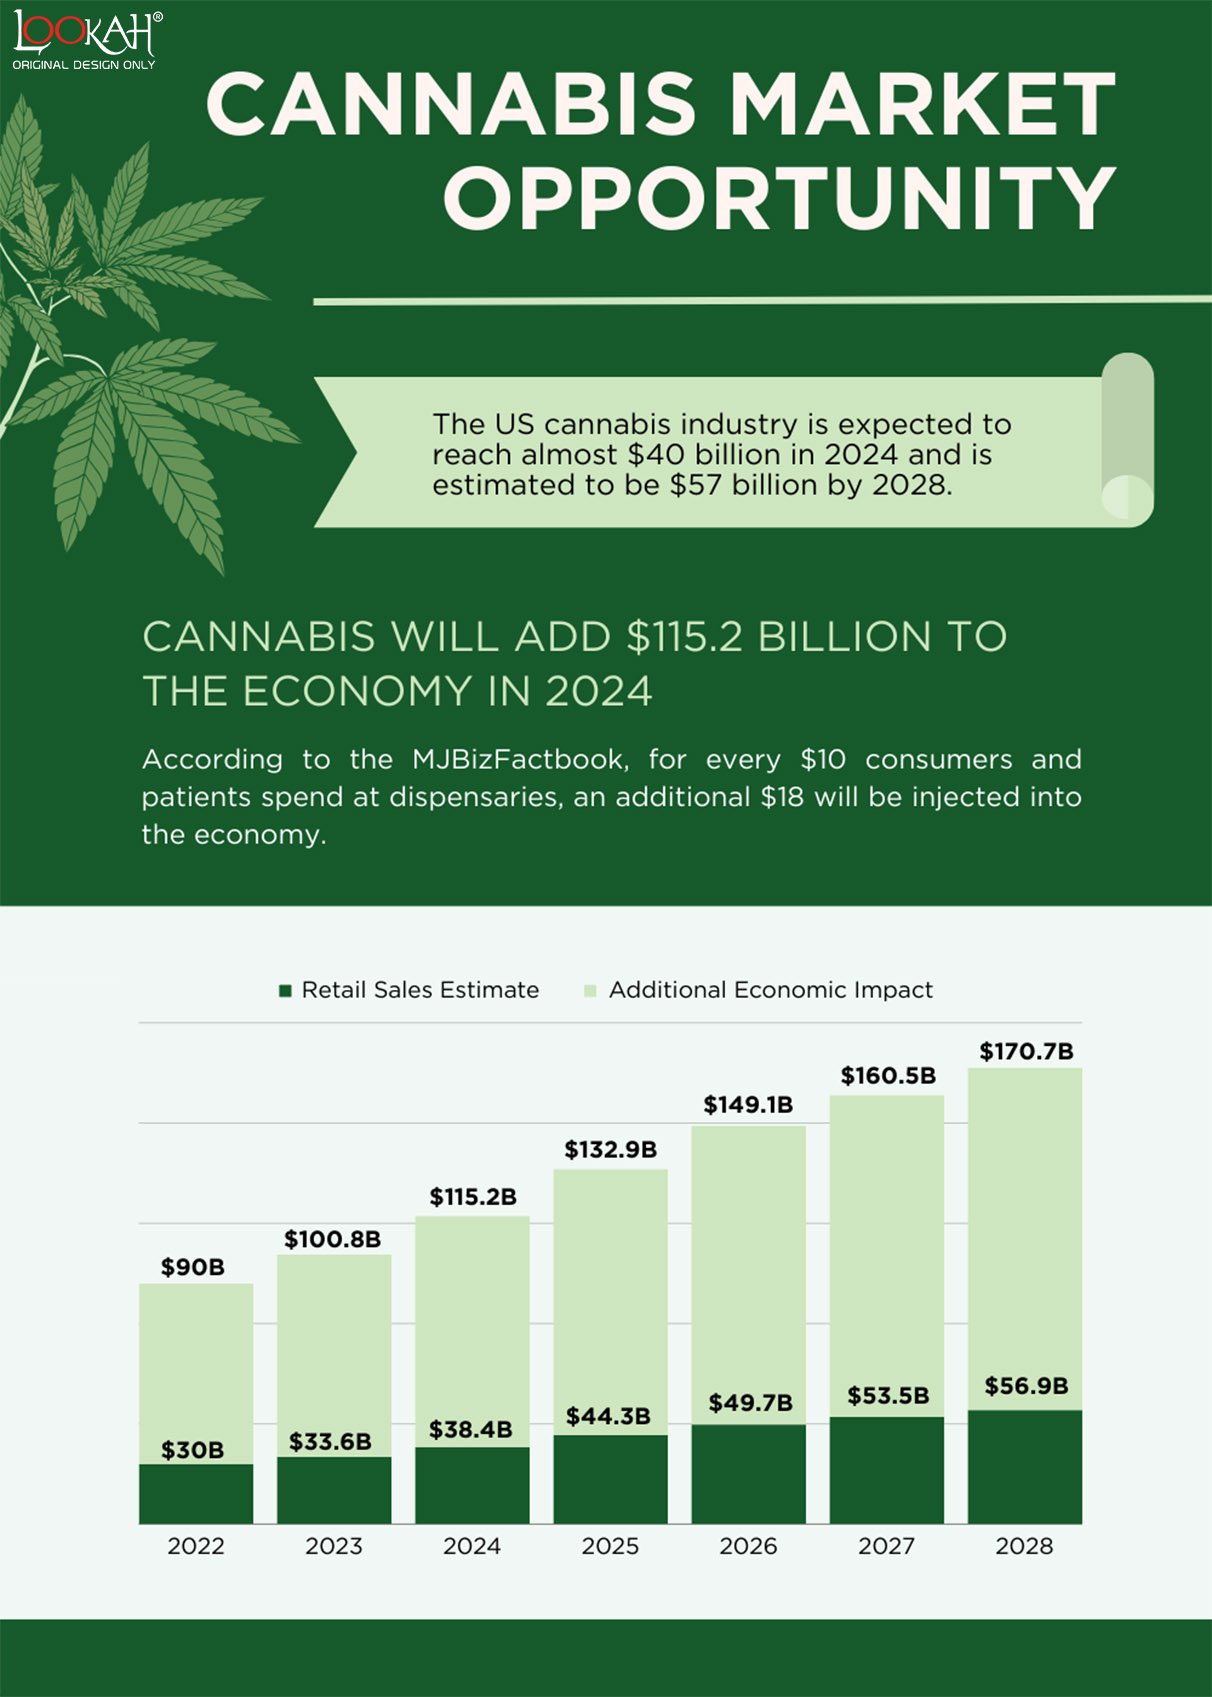 Cannabis market opportunity